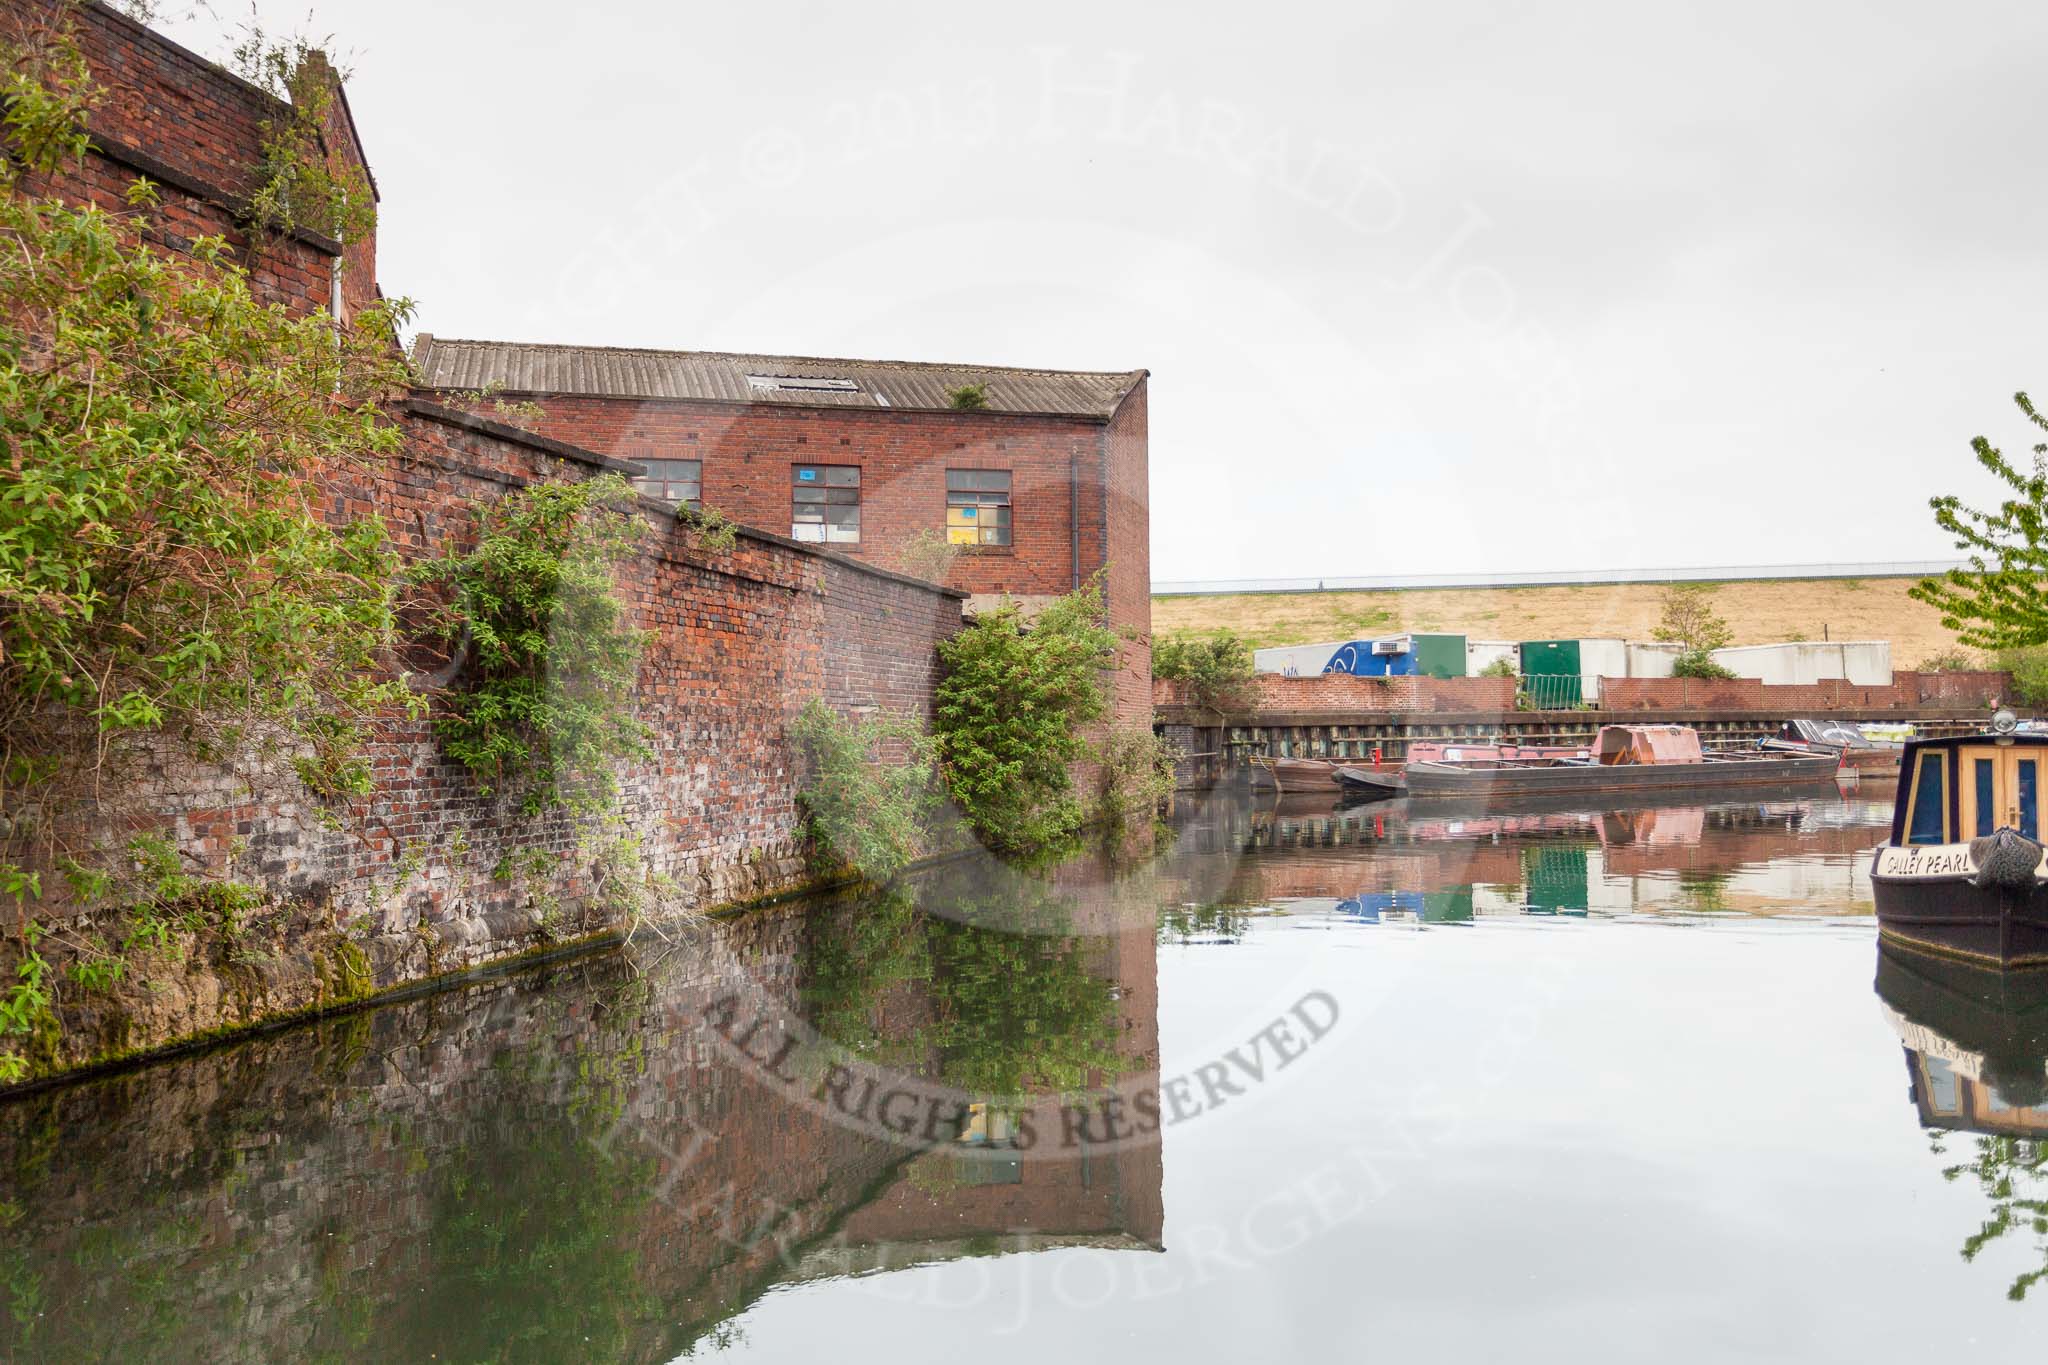 BCN 24h Marathon Challenge 2015: Old industry on the left, where a building seems to be in use despite a tree growing on the roof, at Icknield Port Loop. Ahead is the dam of Rotton Park Reservoir..
Birmingham Canal Navigations,



on 23 May 2015 at 08:49, image #16